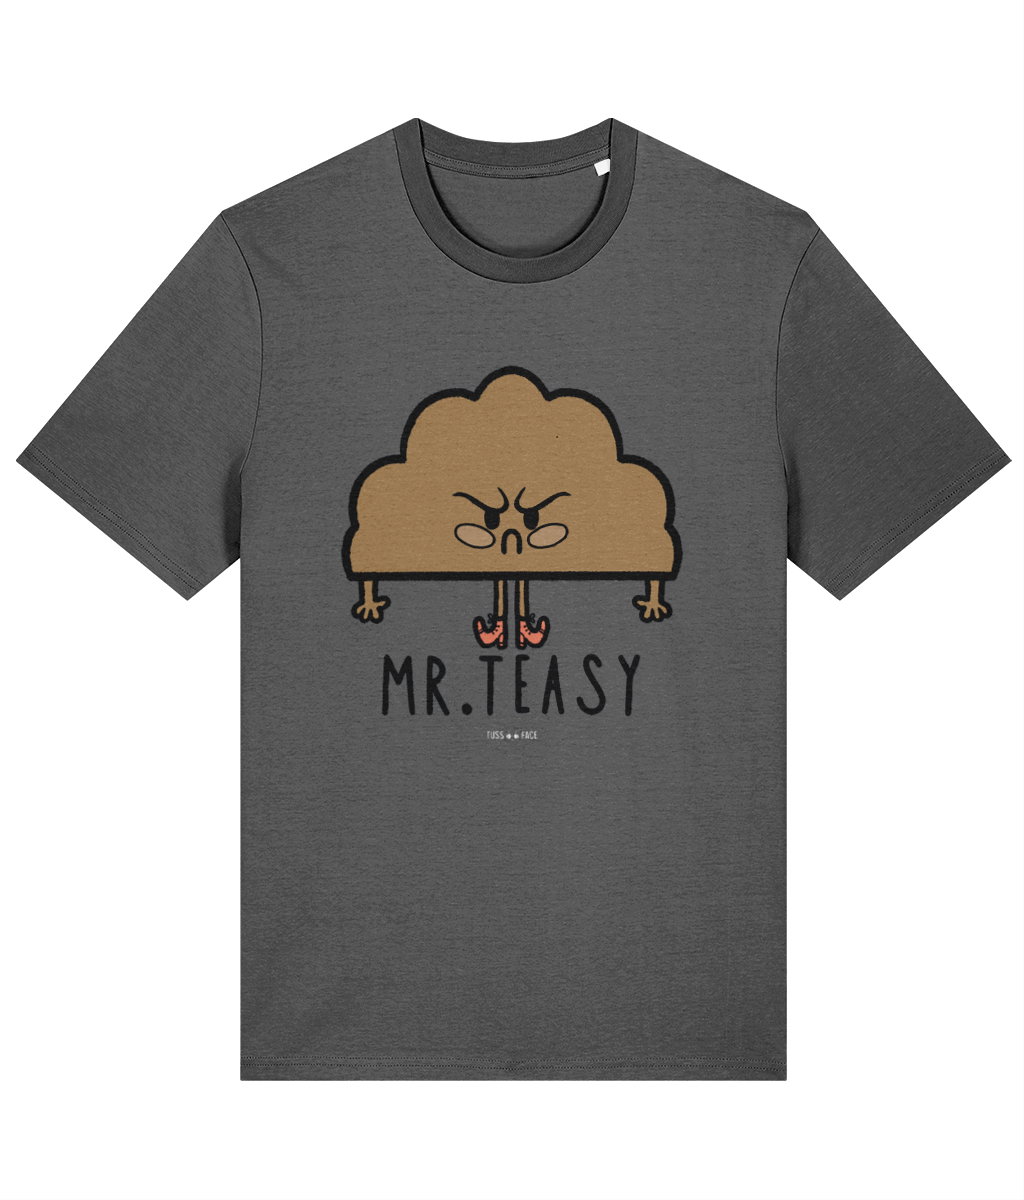 Mr.Teasy - Cornish dialect Tussface T-shirt